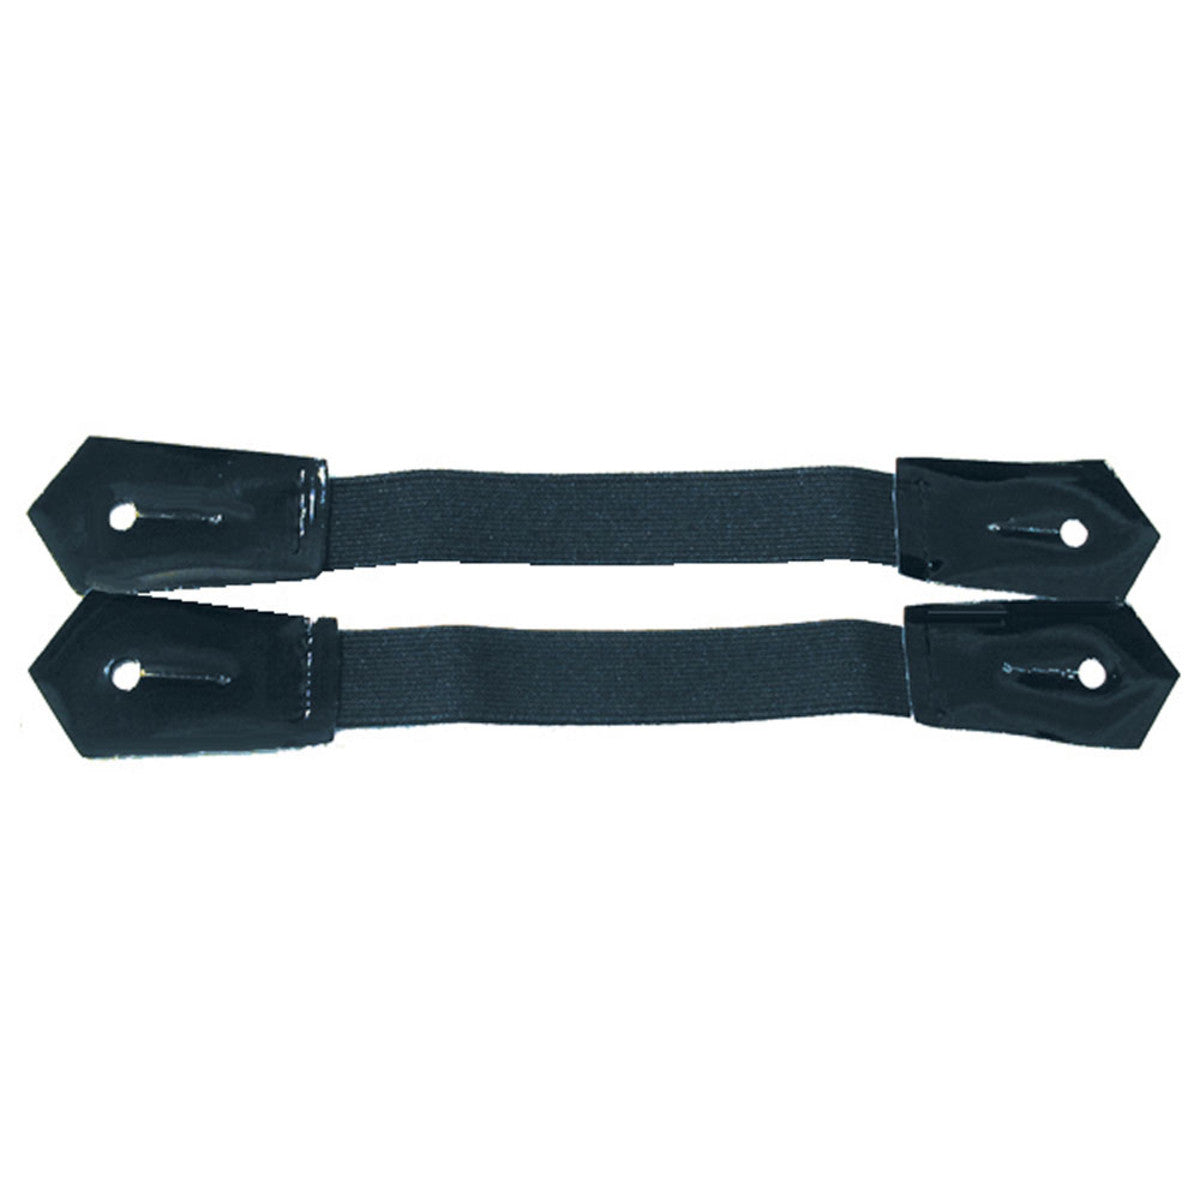 Jod Straps with Clips